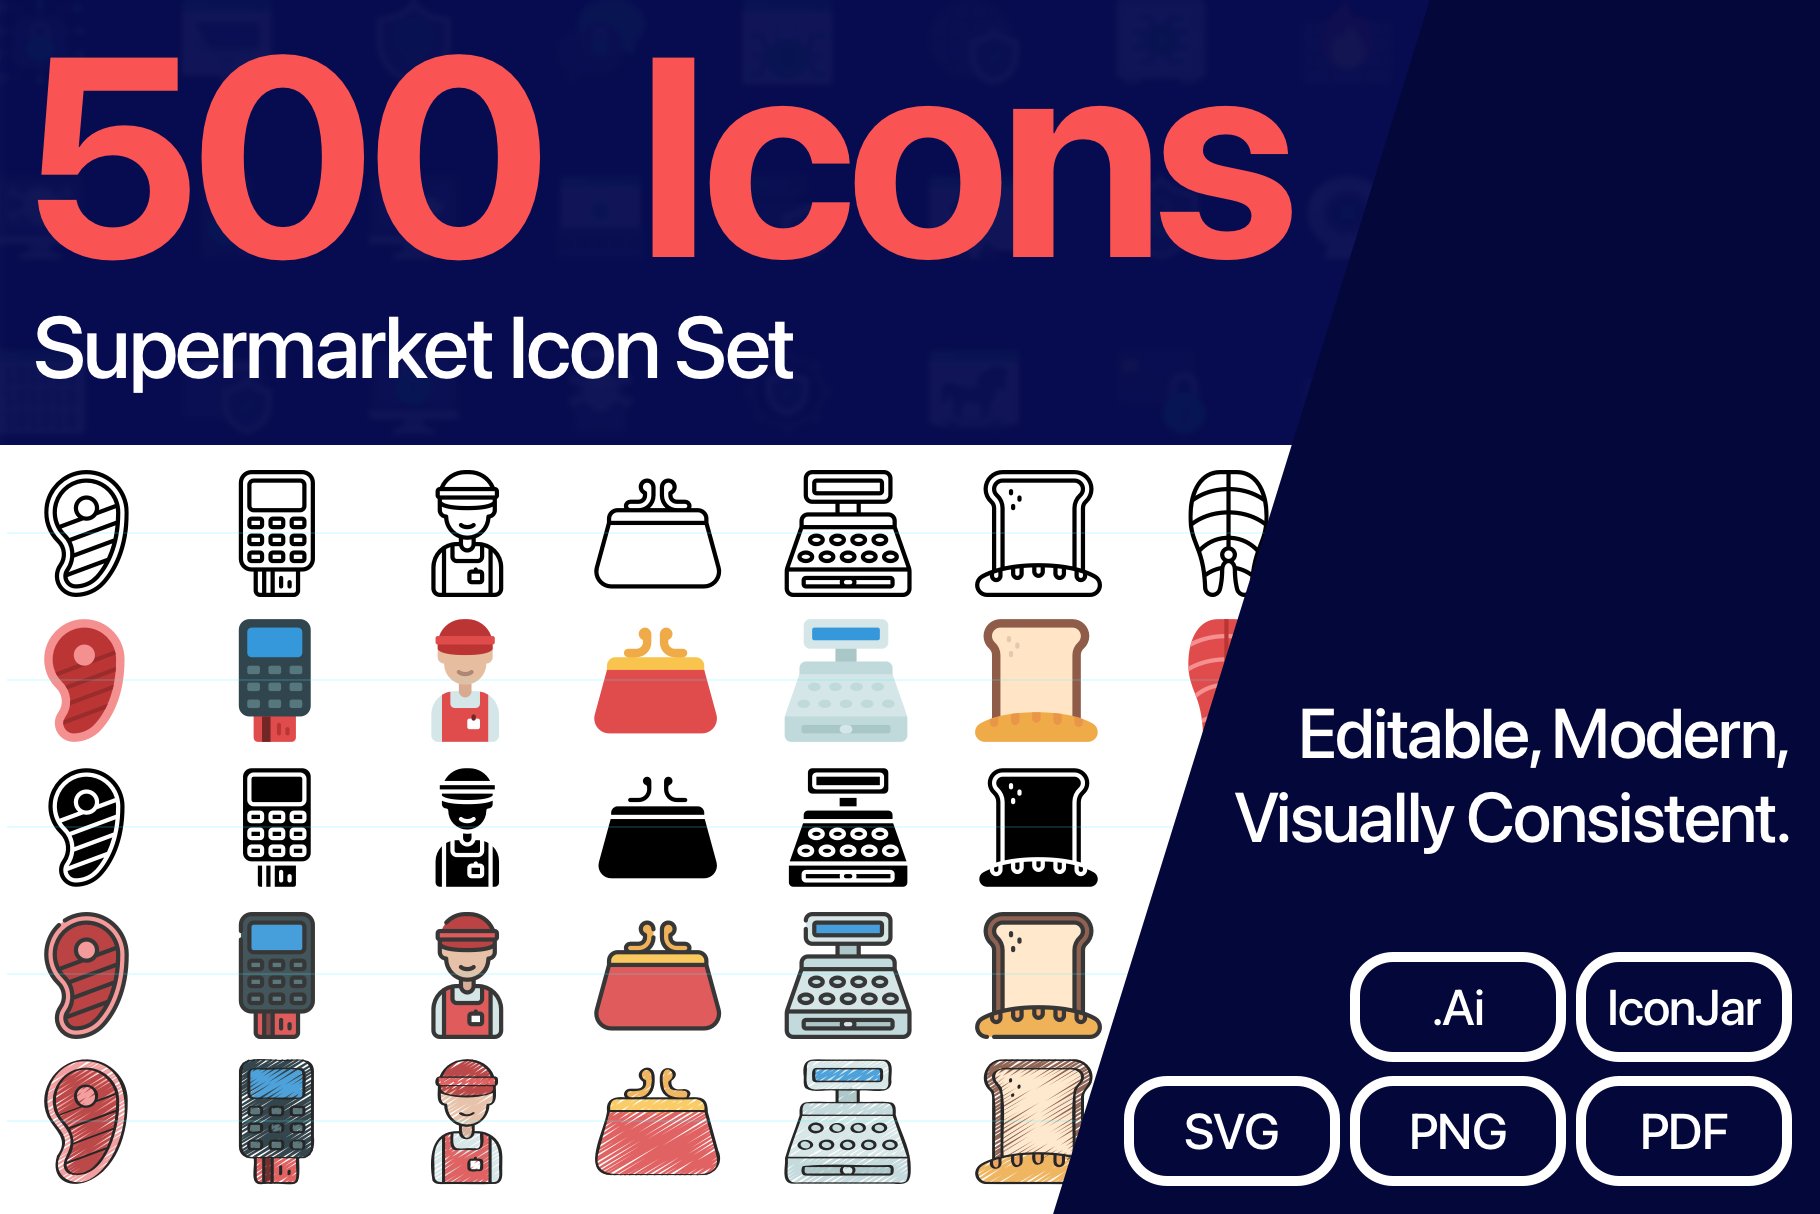 500 Supermarket Vector Icons cover image.